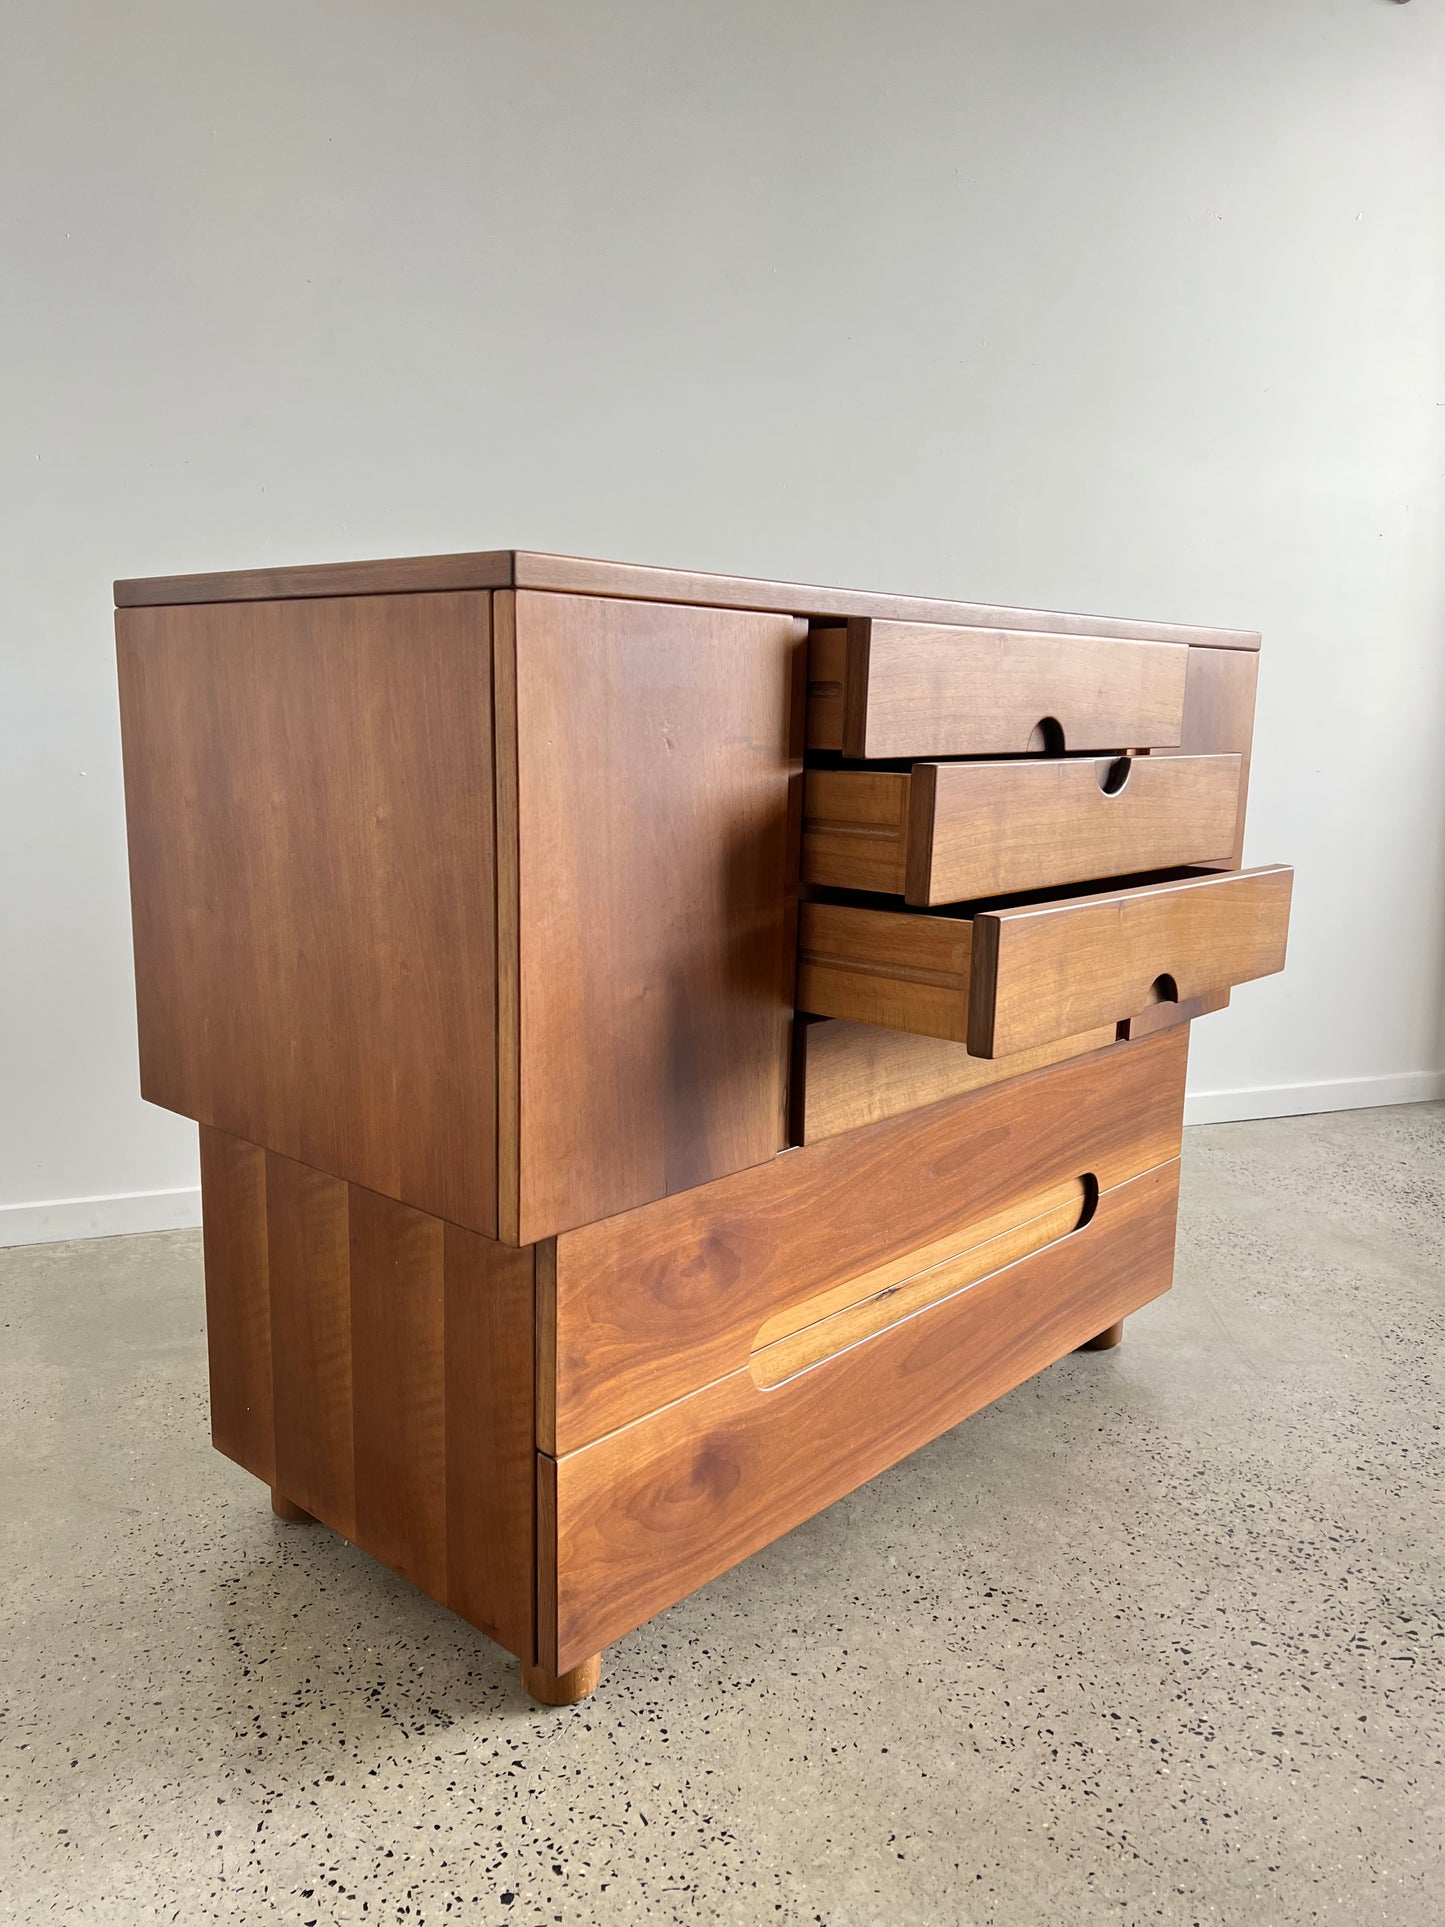 "Serena"by Giovanni Michelucci for Poltronova Chest of Drawers in Walnut Wood, 1955